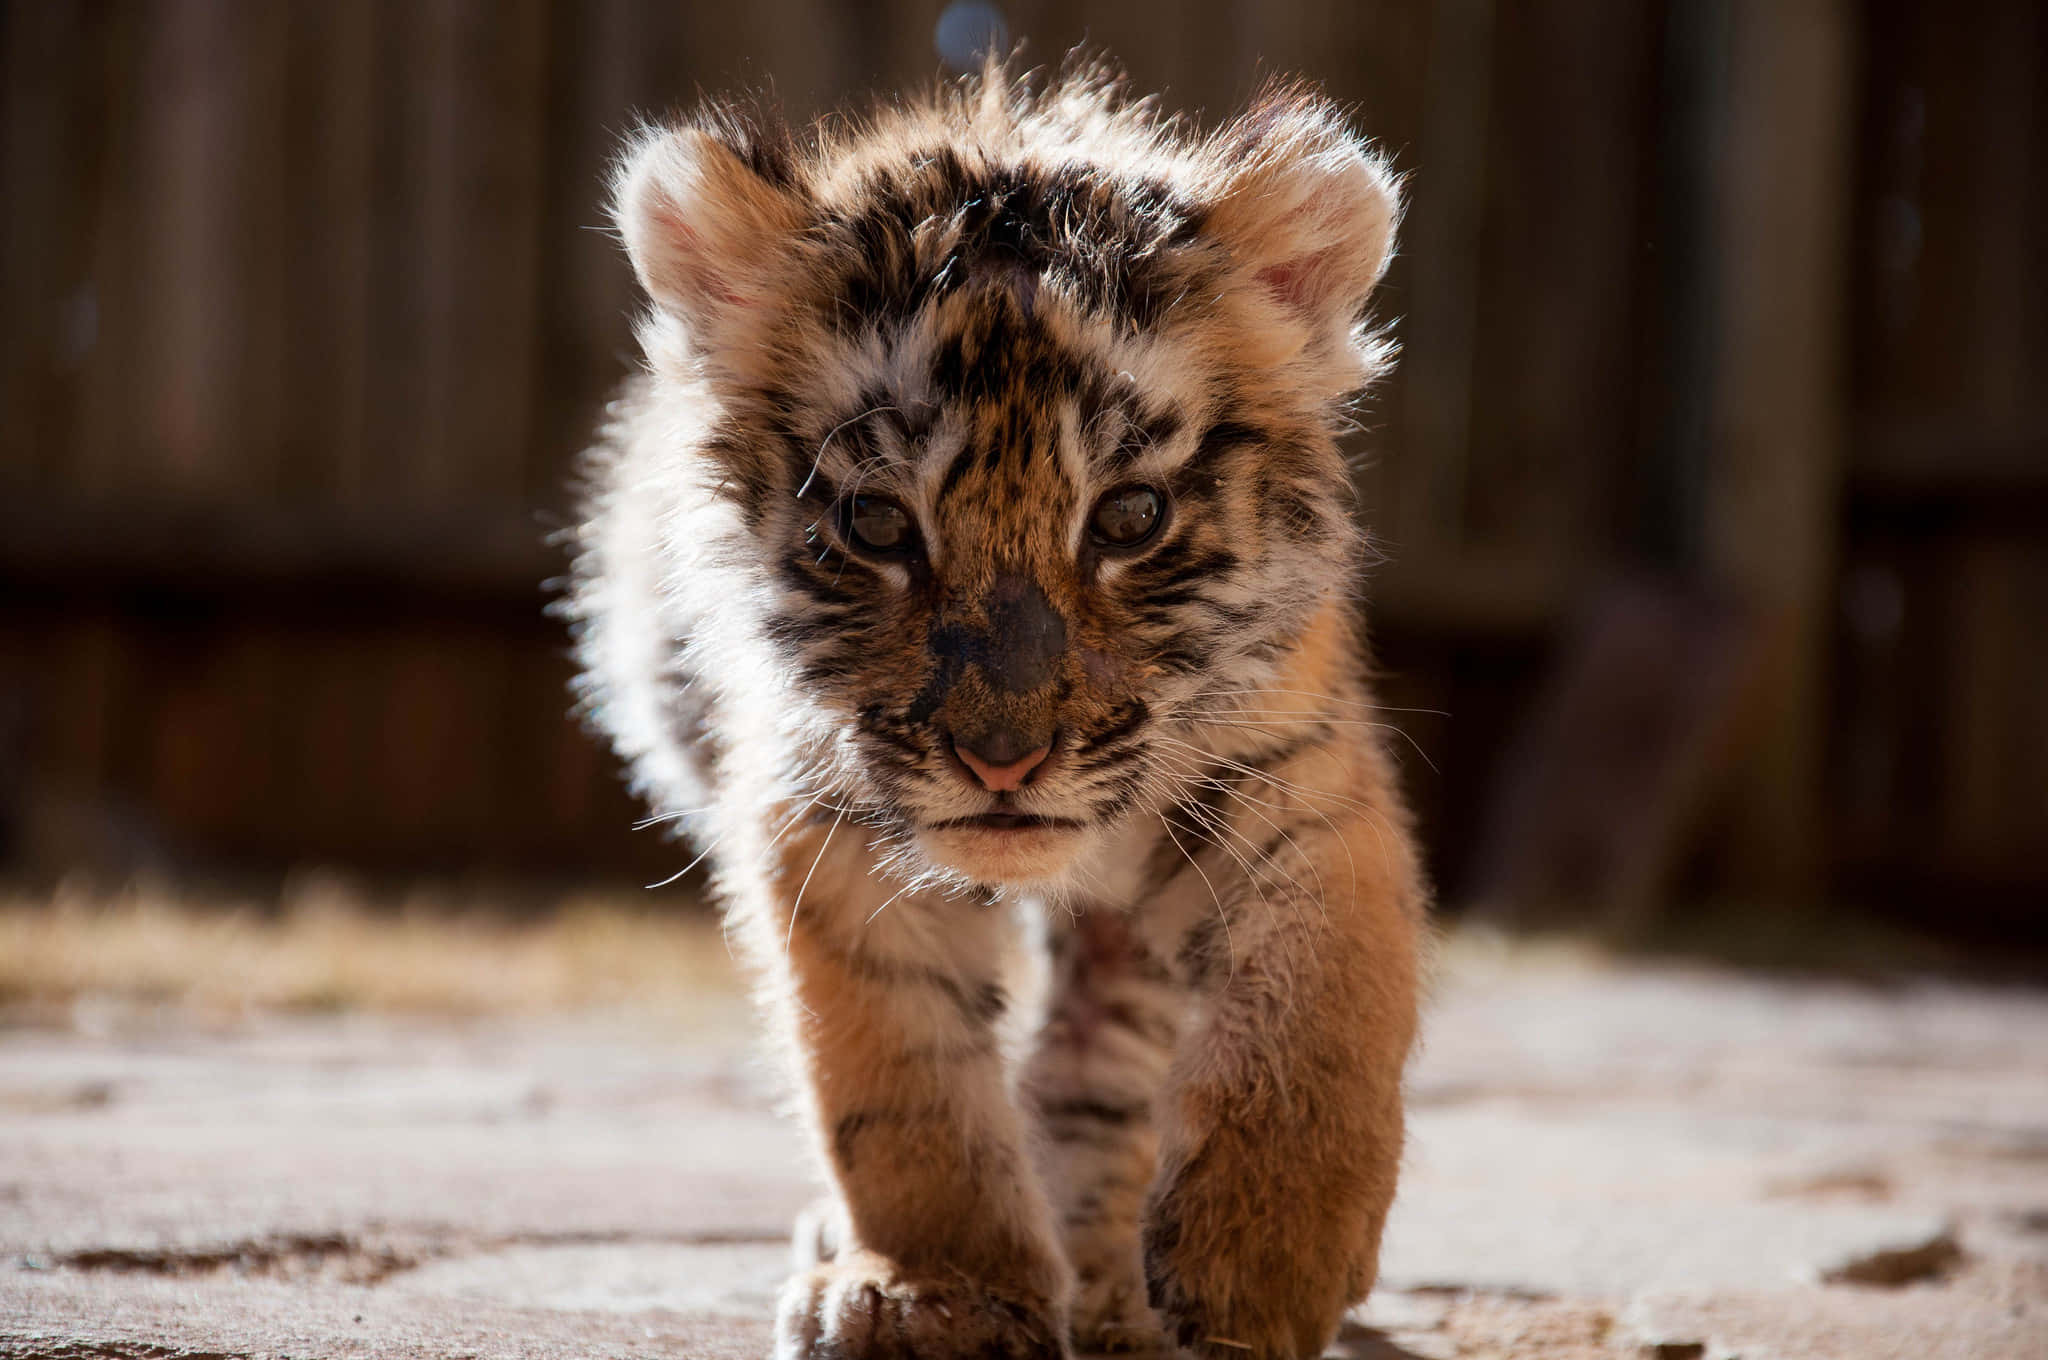 Cute Baby Tiger Sitting on the Ground